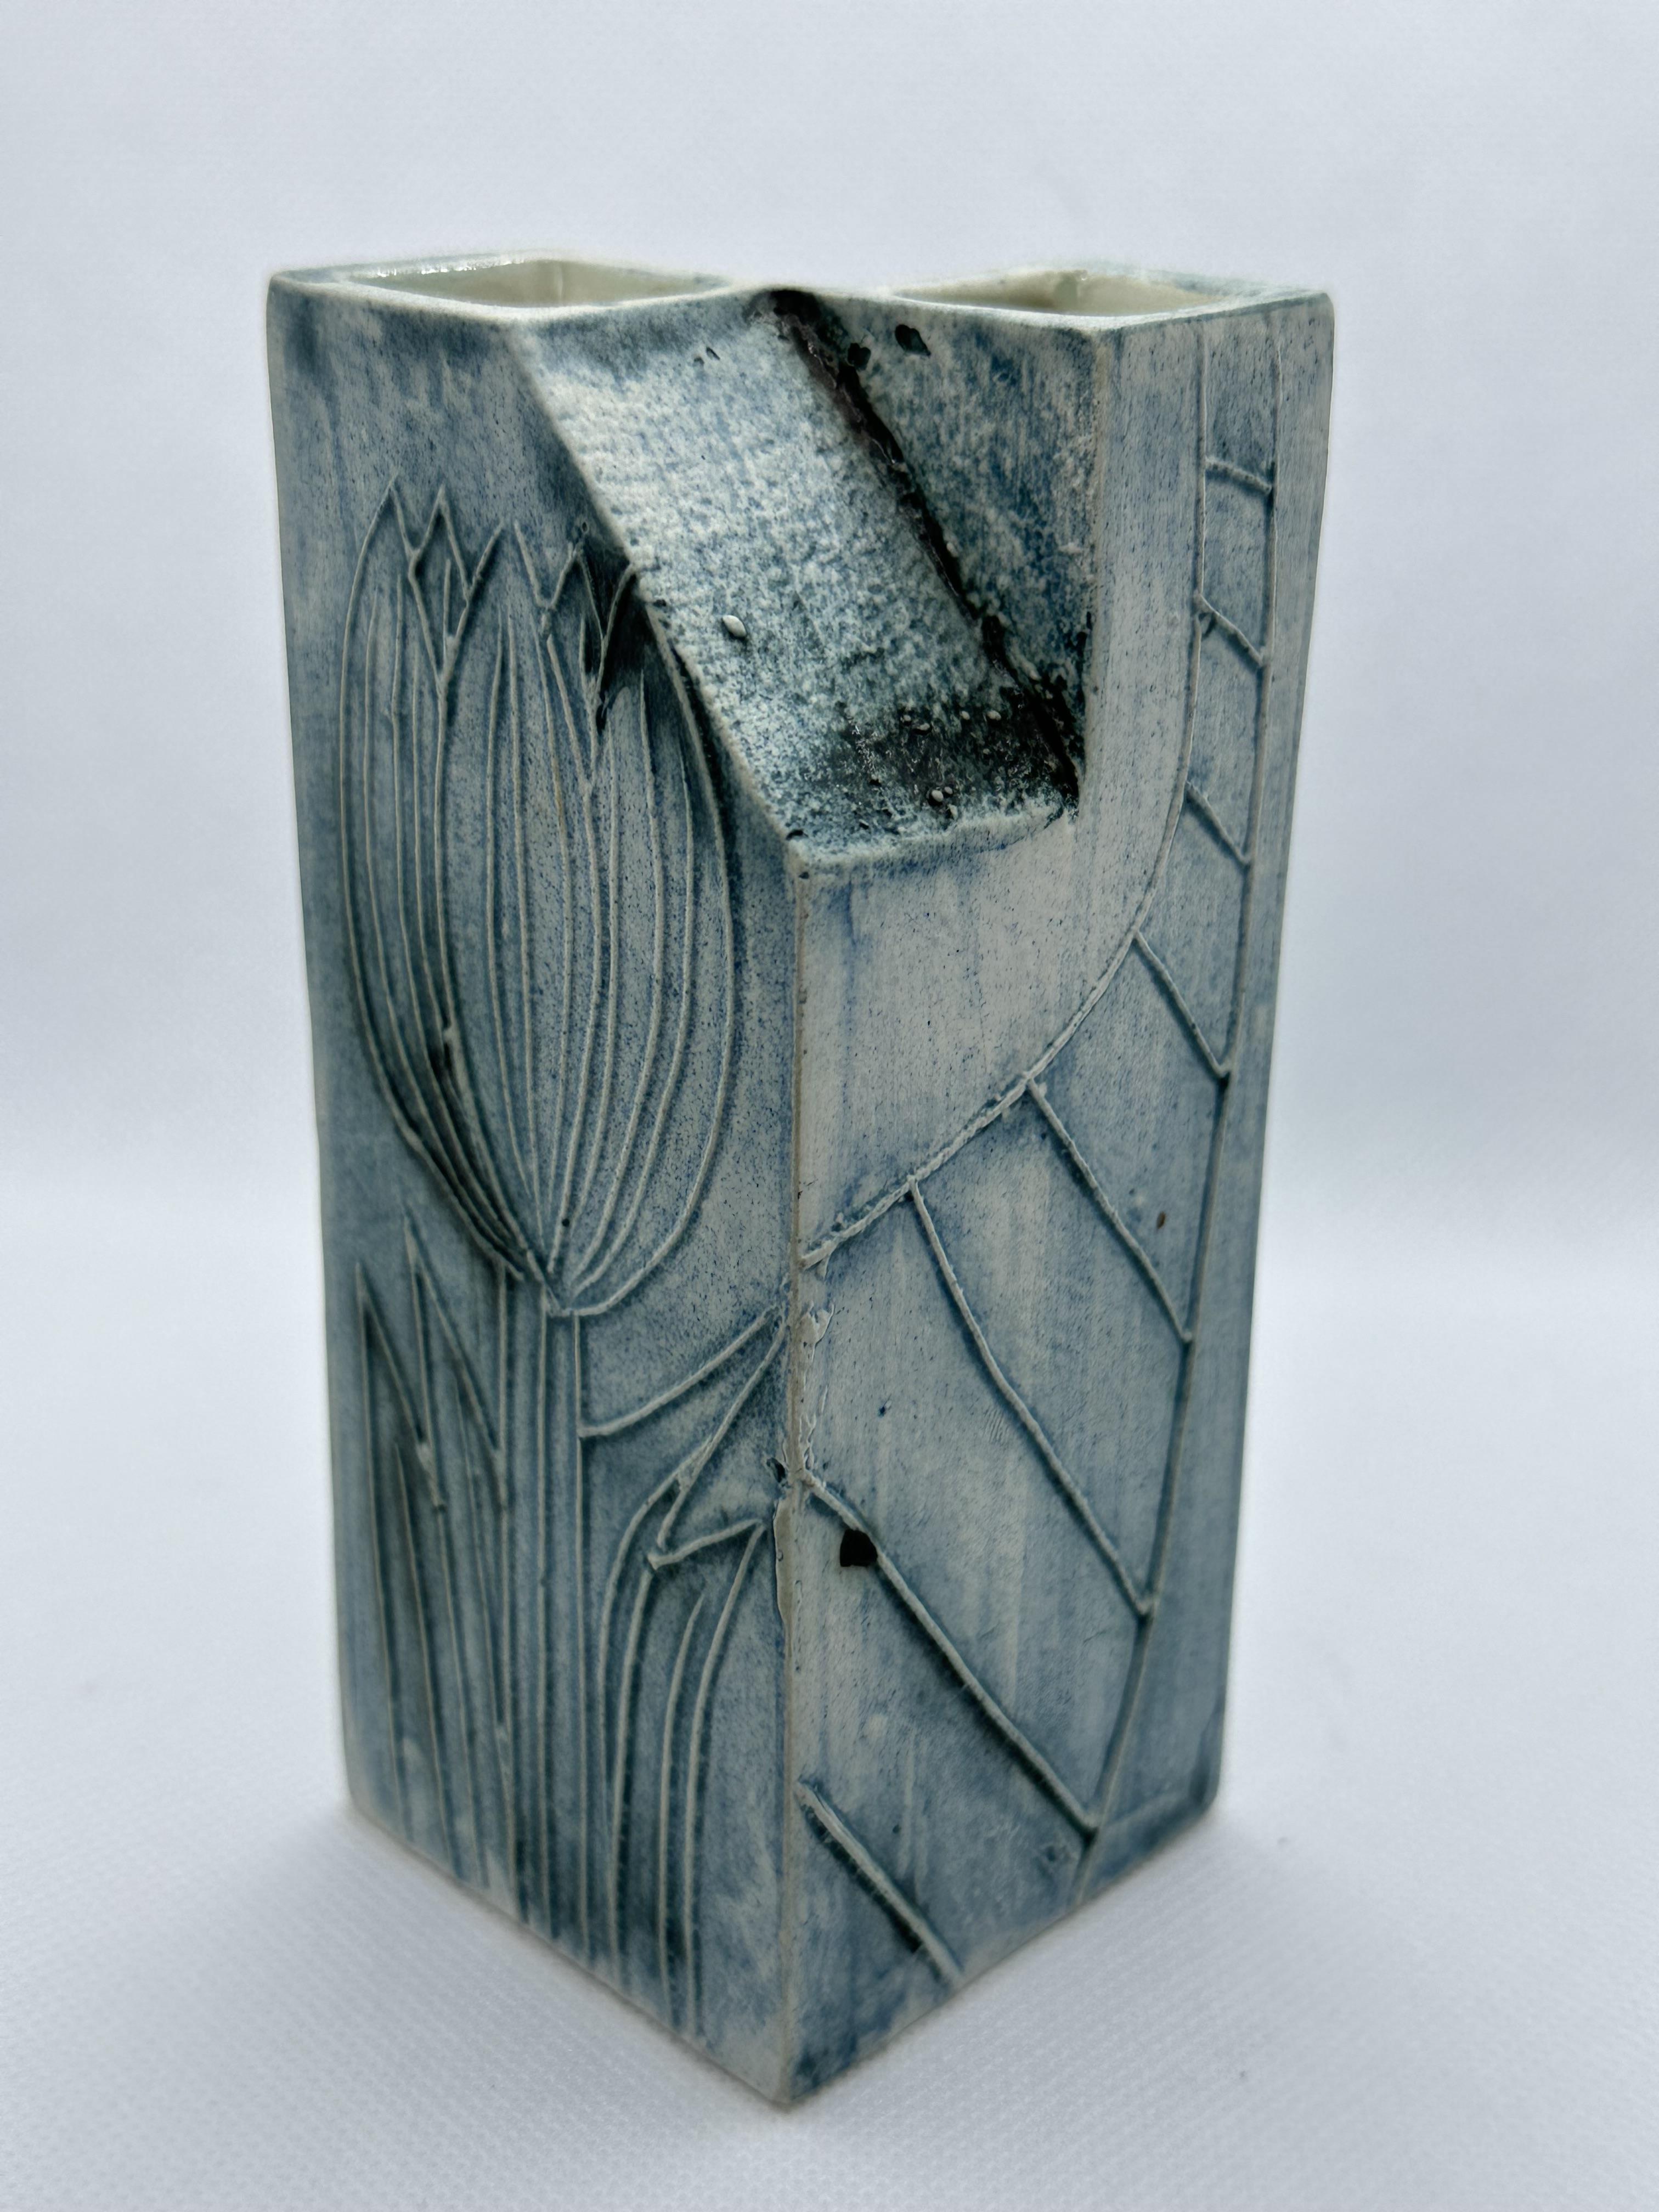 Wood Fired Ceramic Vase (H14cm) along with Carn Pottery Pe - Image 12 of 22